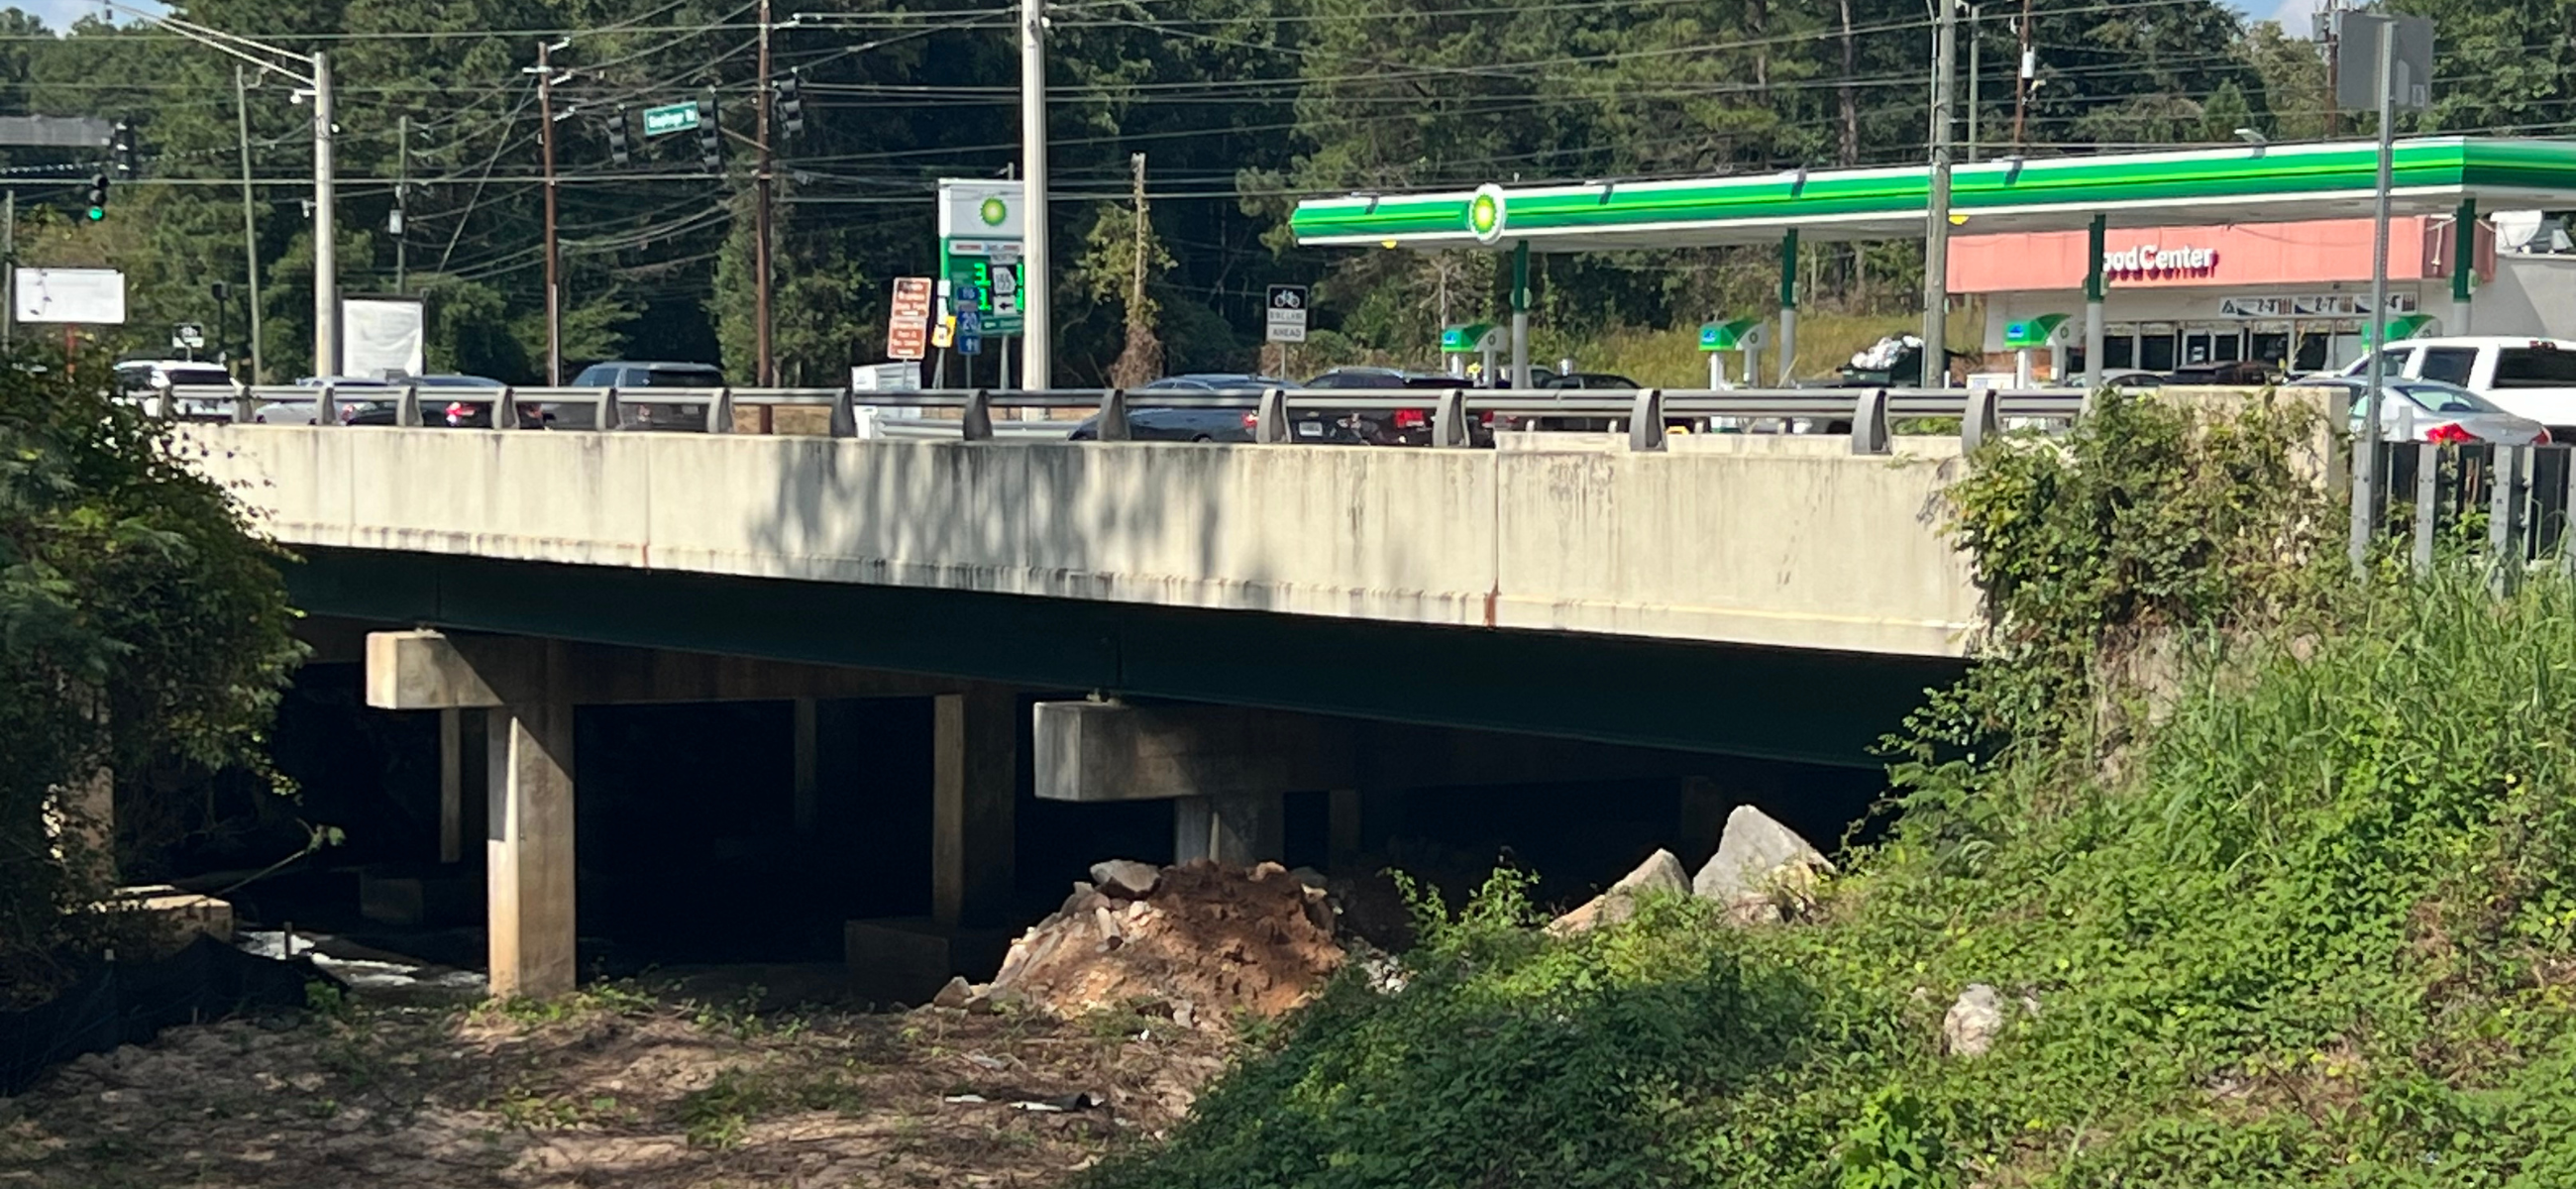 The bridge on Snapfinger Road in DeKalb county crosses over Snapfinger Creek. A national report said it is one of Georgia’s most traveled bridges, and one of its most structurally deficient bridges. It was built in 1954.